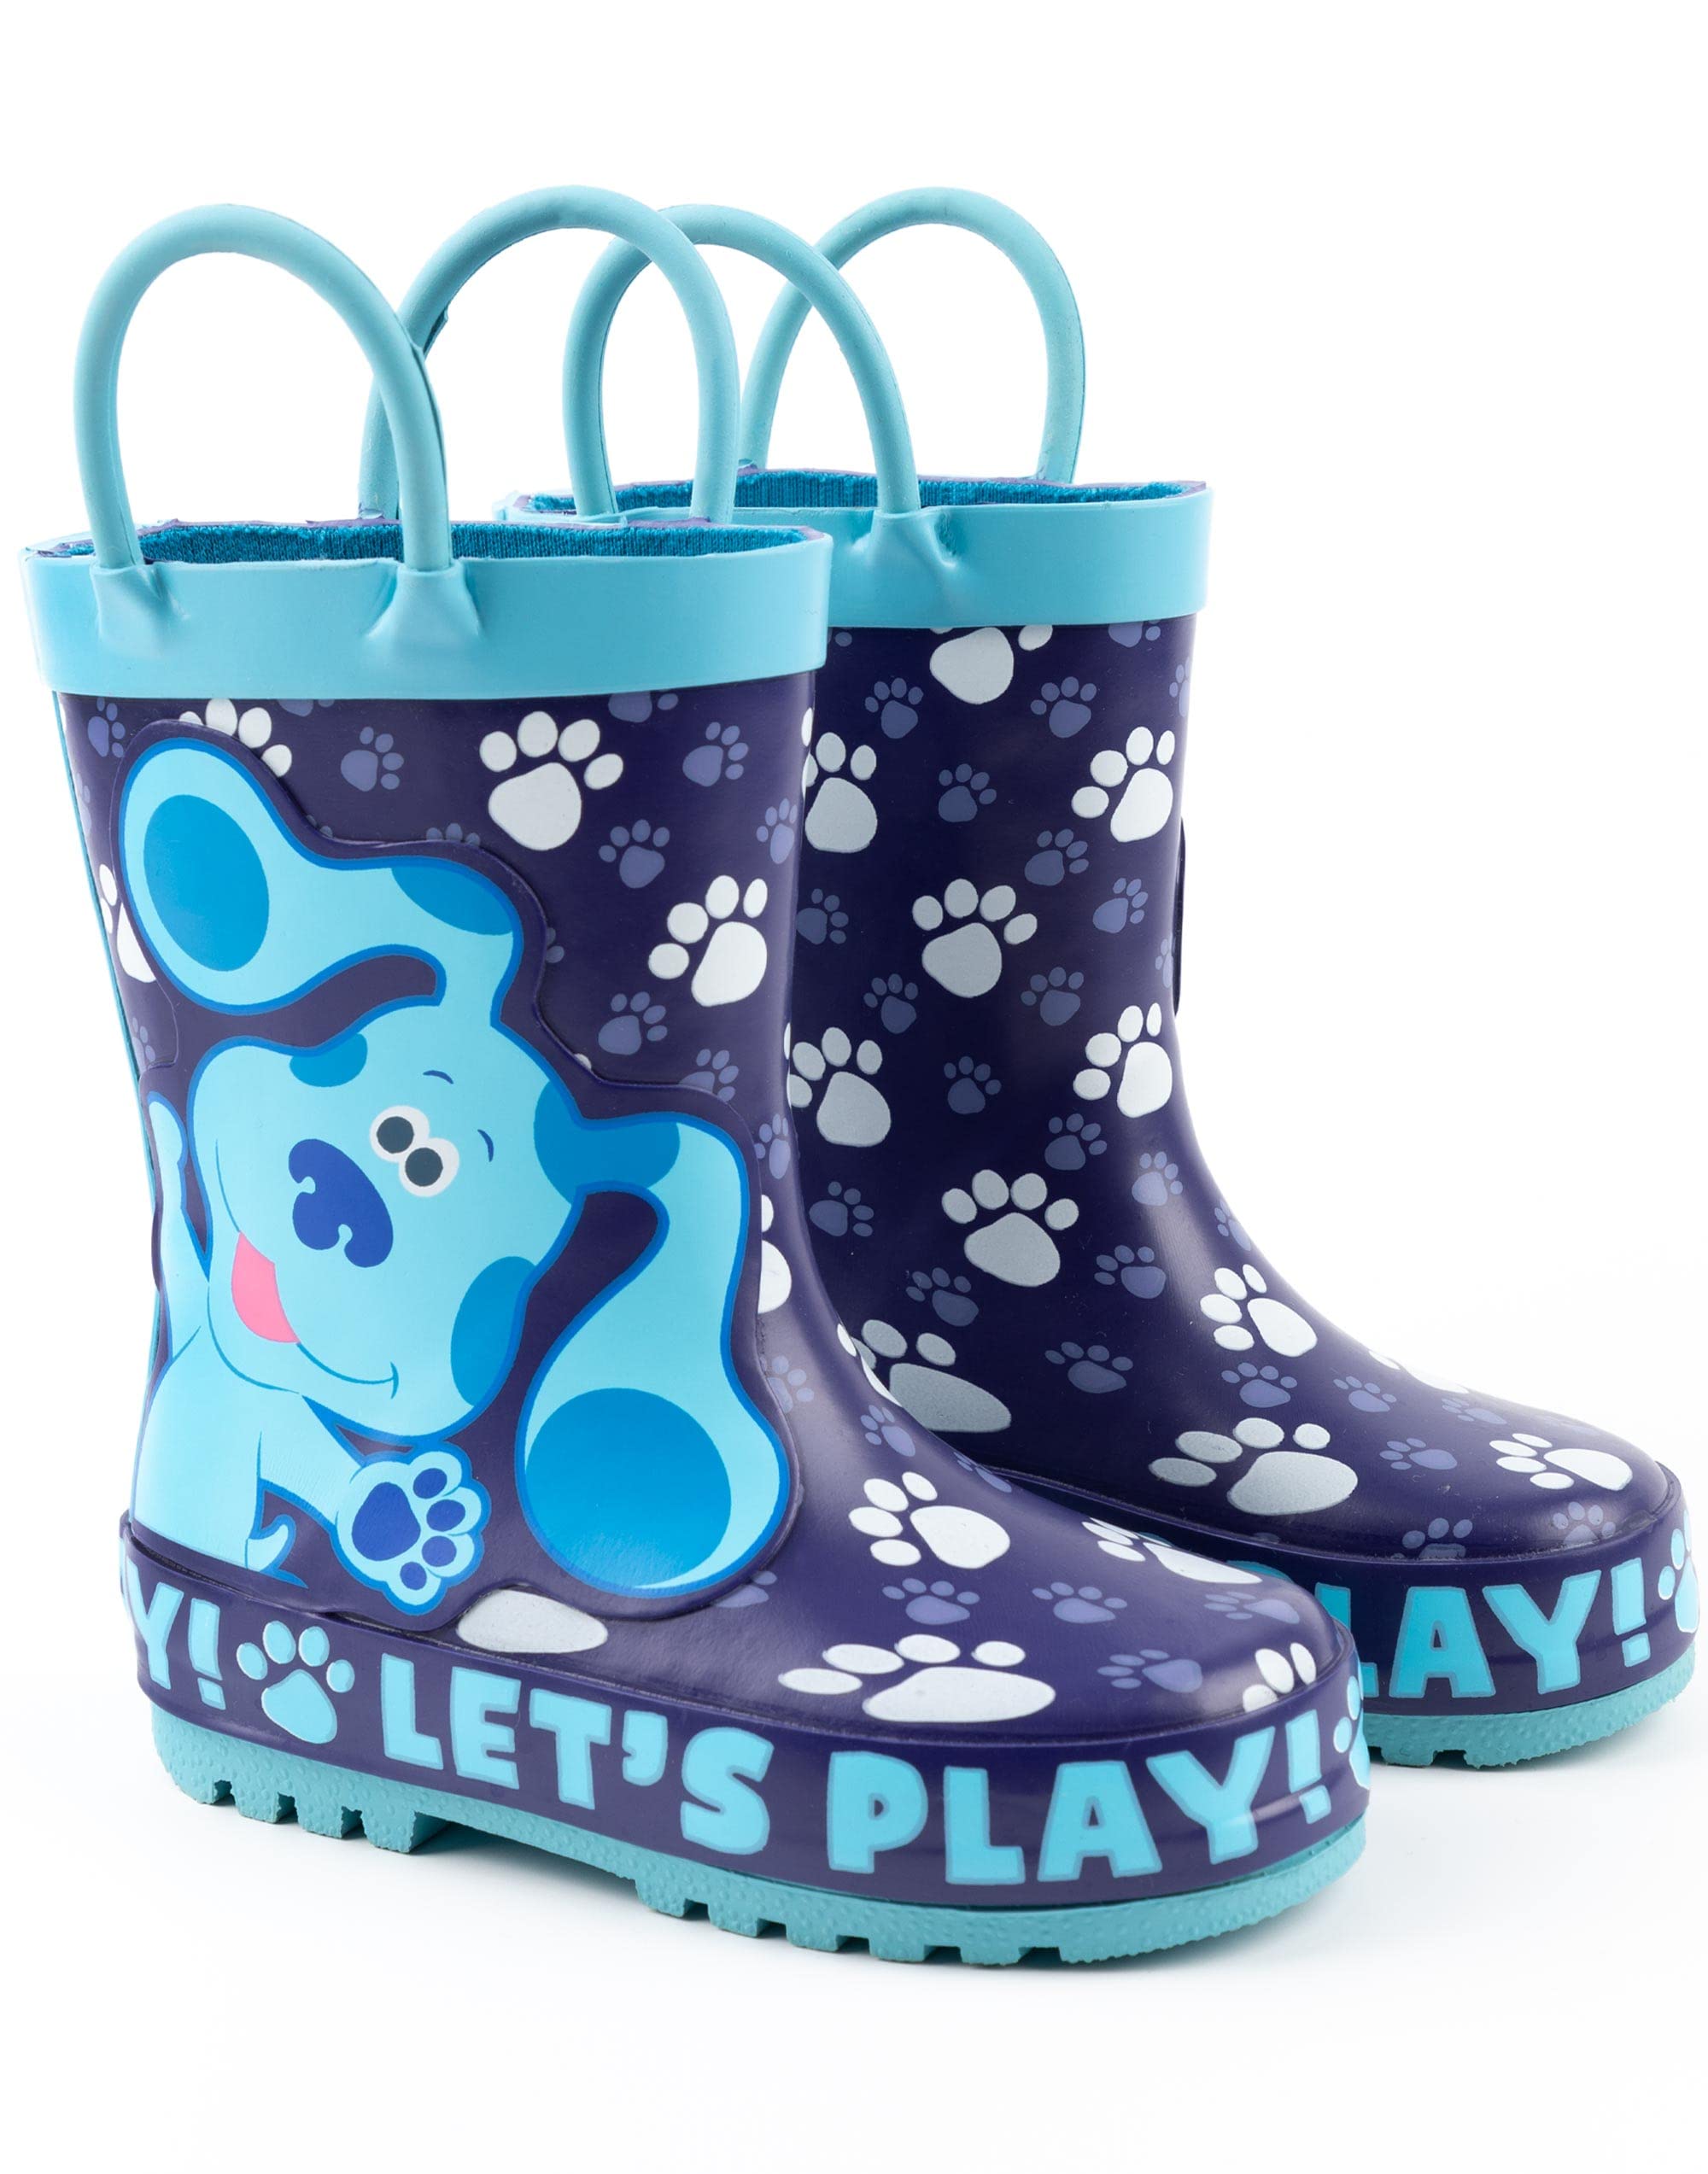 Blue's Clues And You Wellies Boys Girls Kids Toddlers | Animated Blue Puppy Lets Play Wellington Boots Water Resistant Walking Shoes